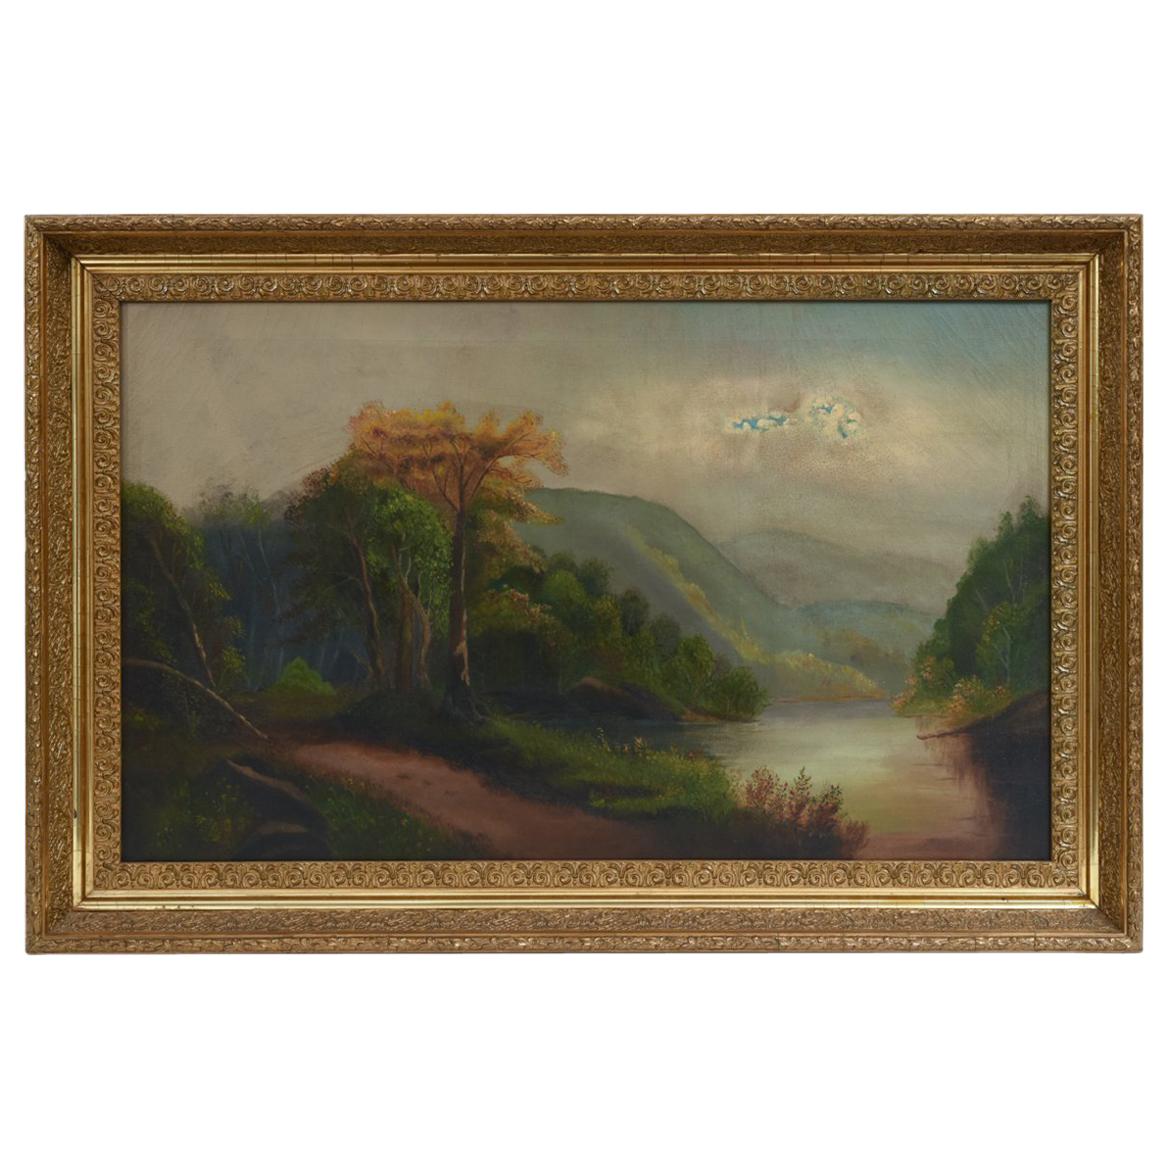 Oil on Canvas Hudson Valley River School Painting